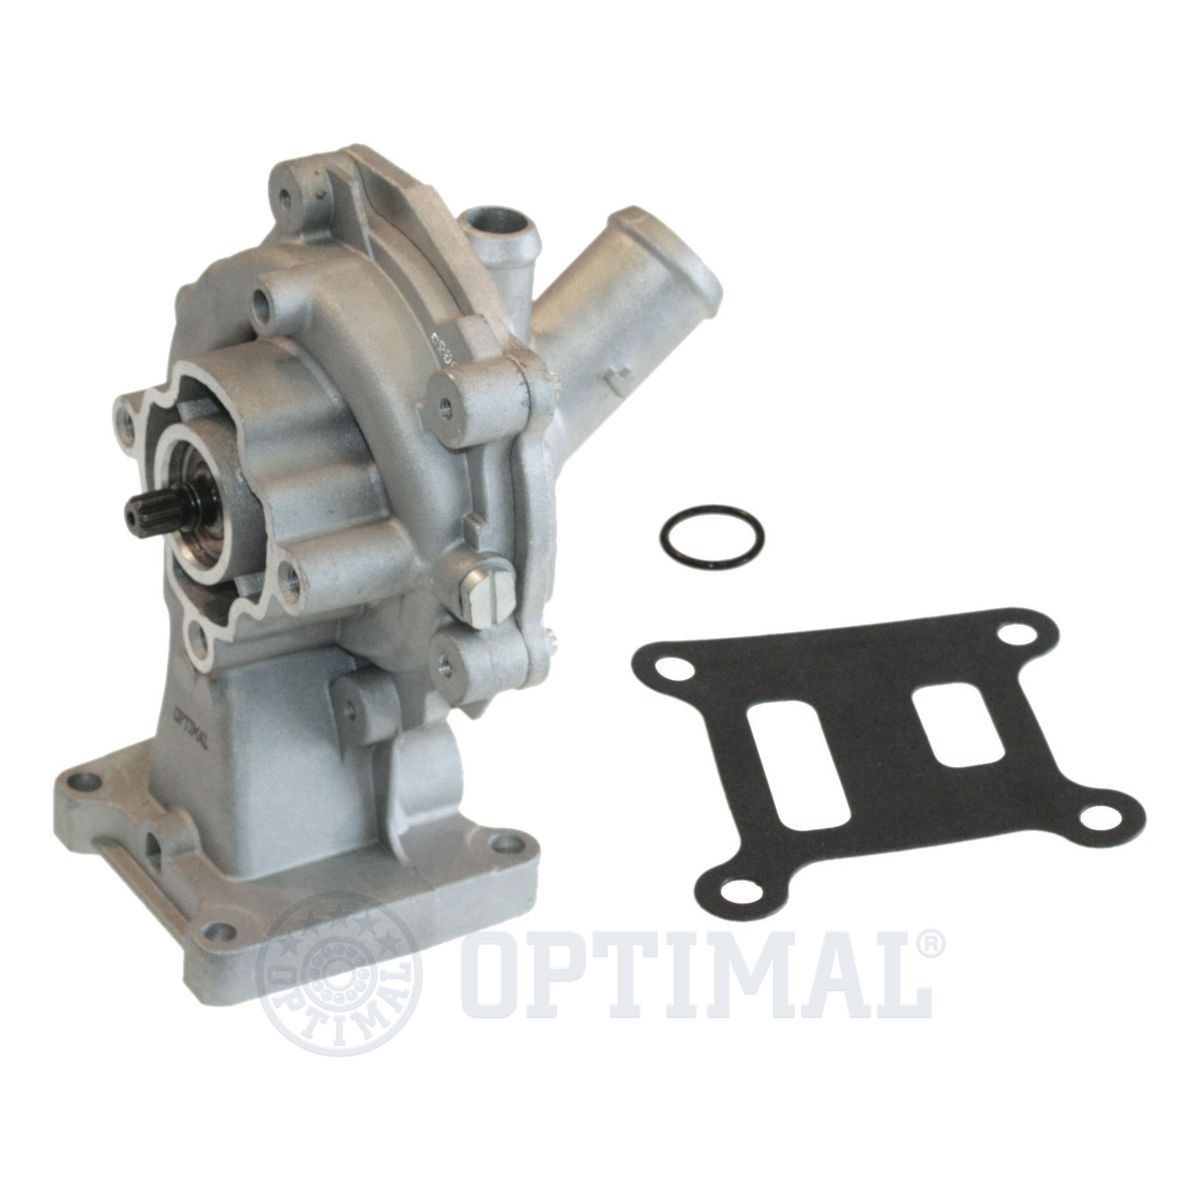 OPTIMAL AQ-2197 Water pump with gaskets/seals, with housing